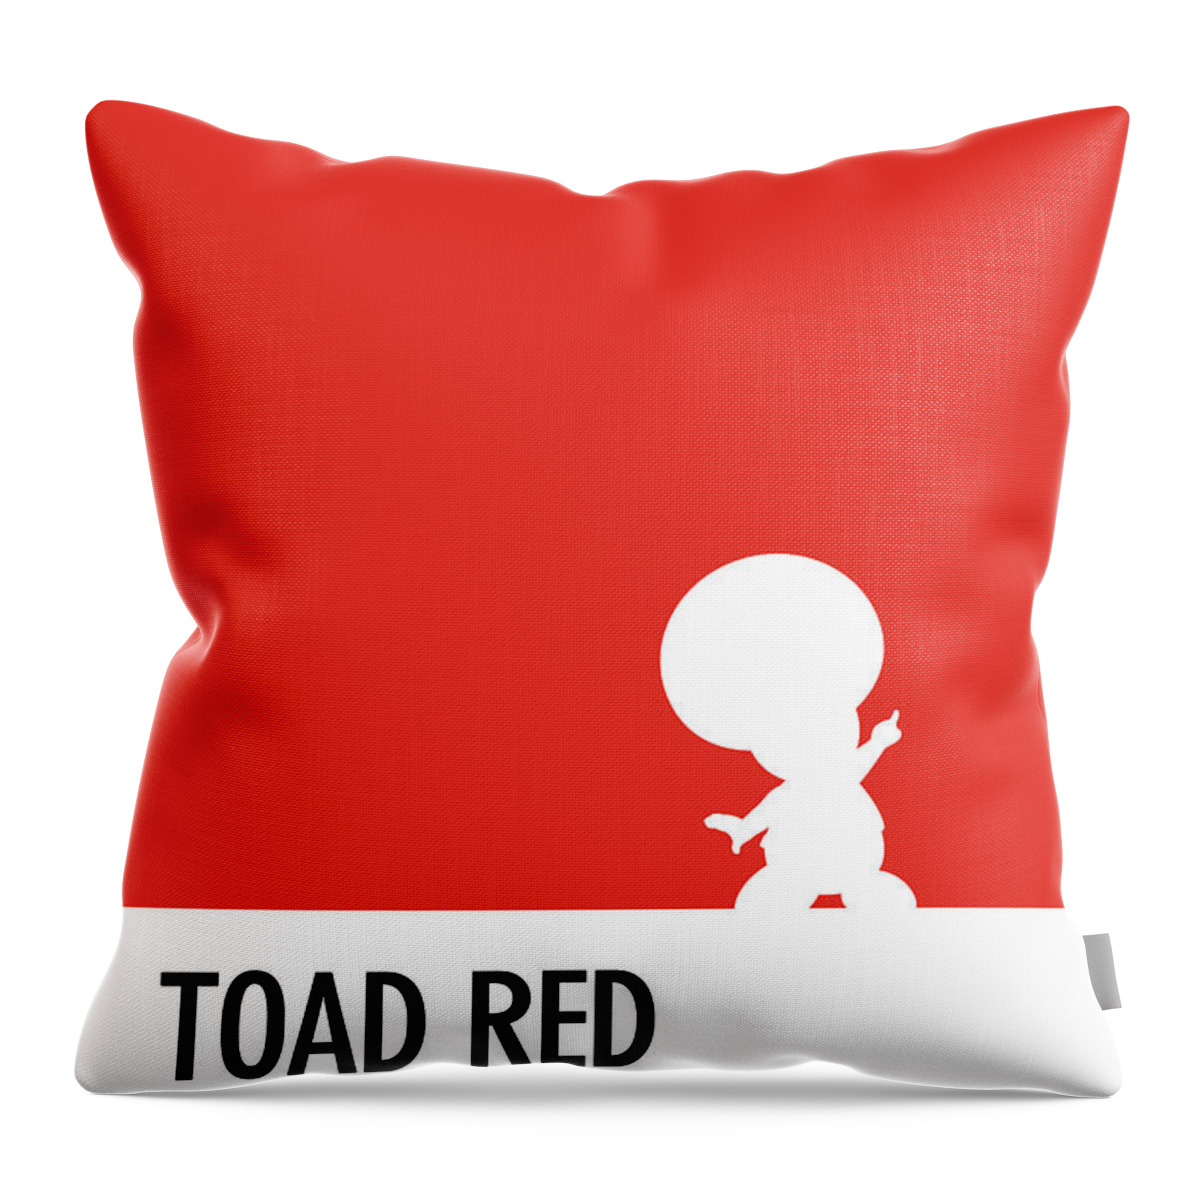 Mario Throw Pillow featuring the digital art No41 My Minimal Color Code poster Toad by Chungkong Art